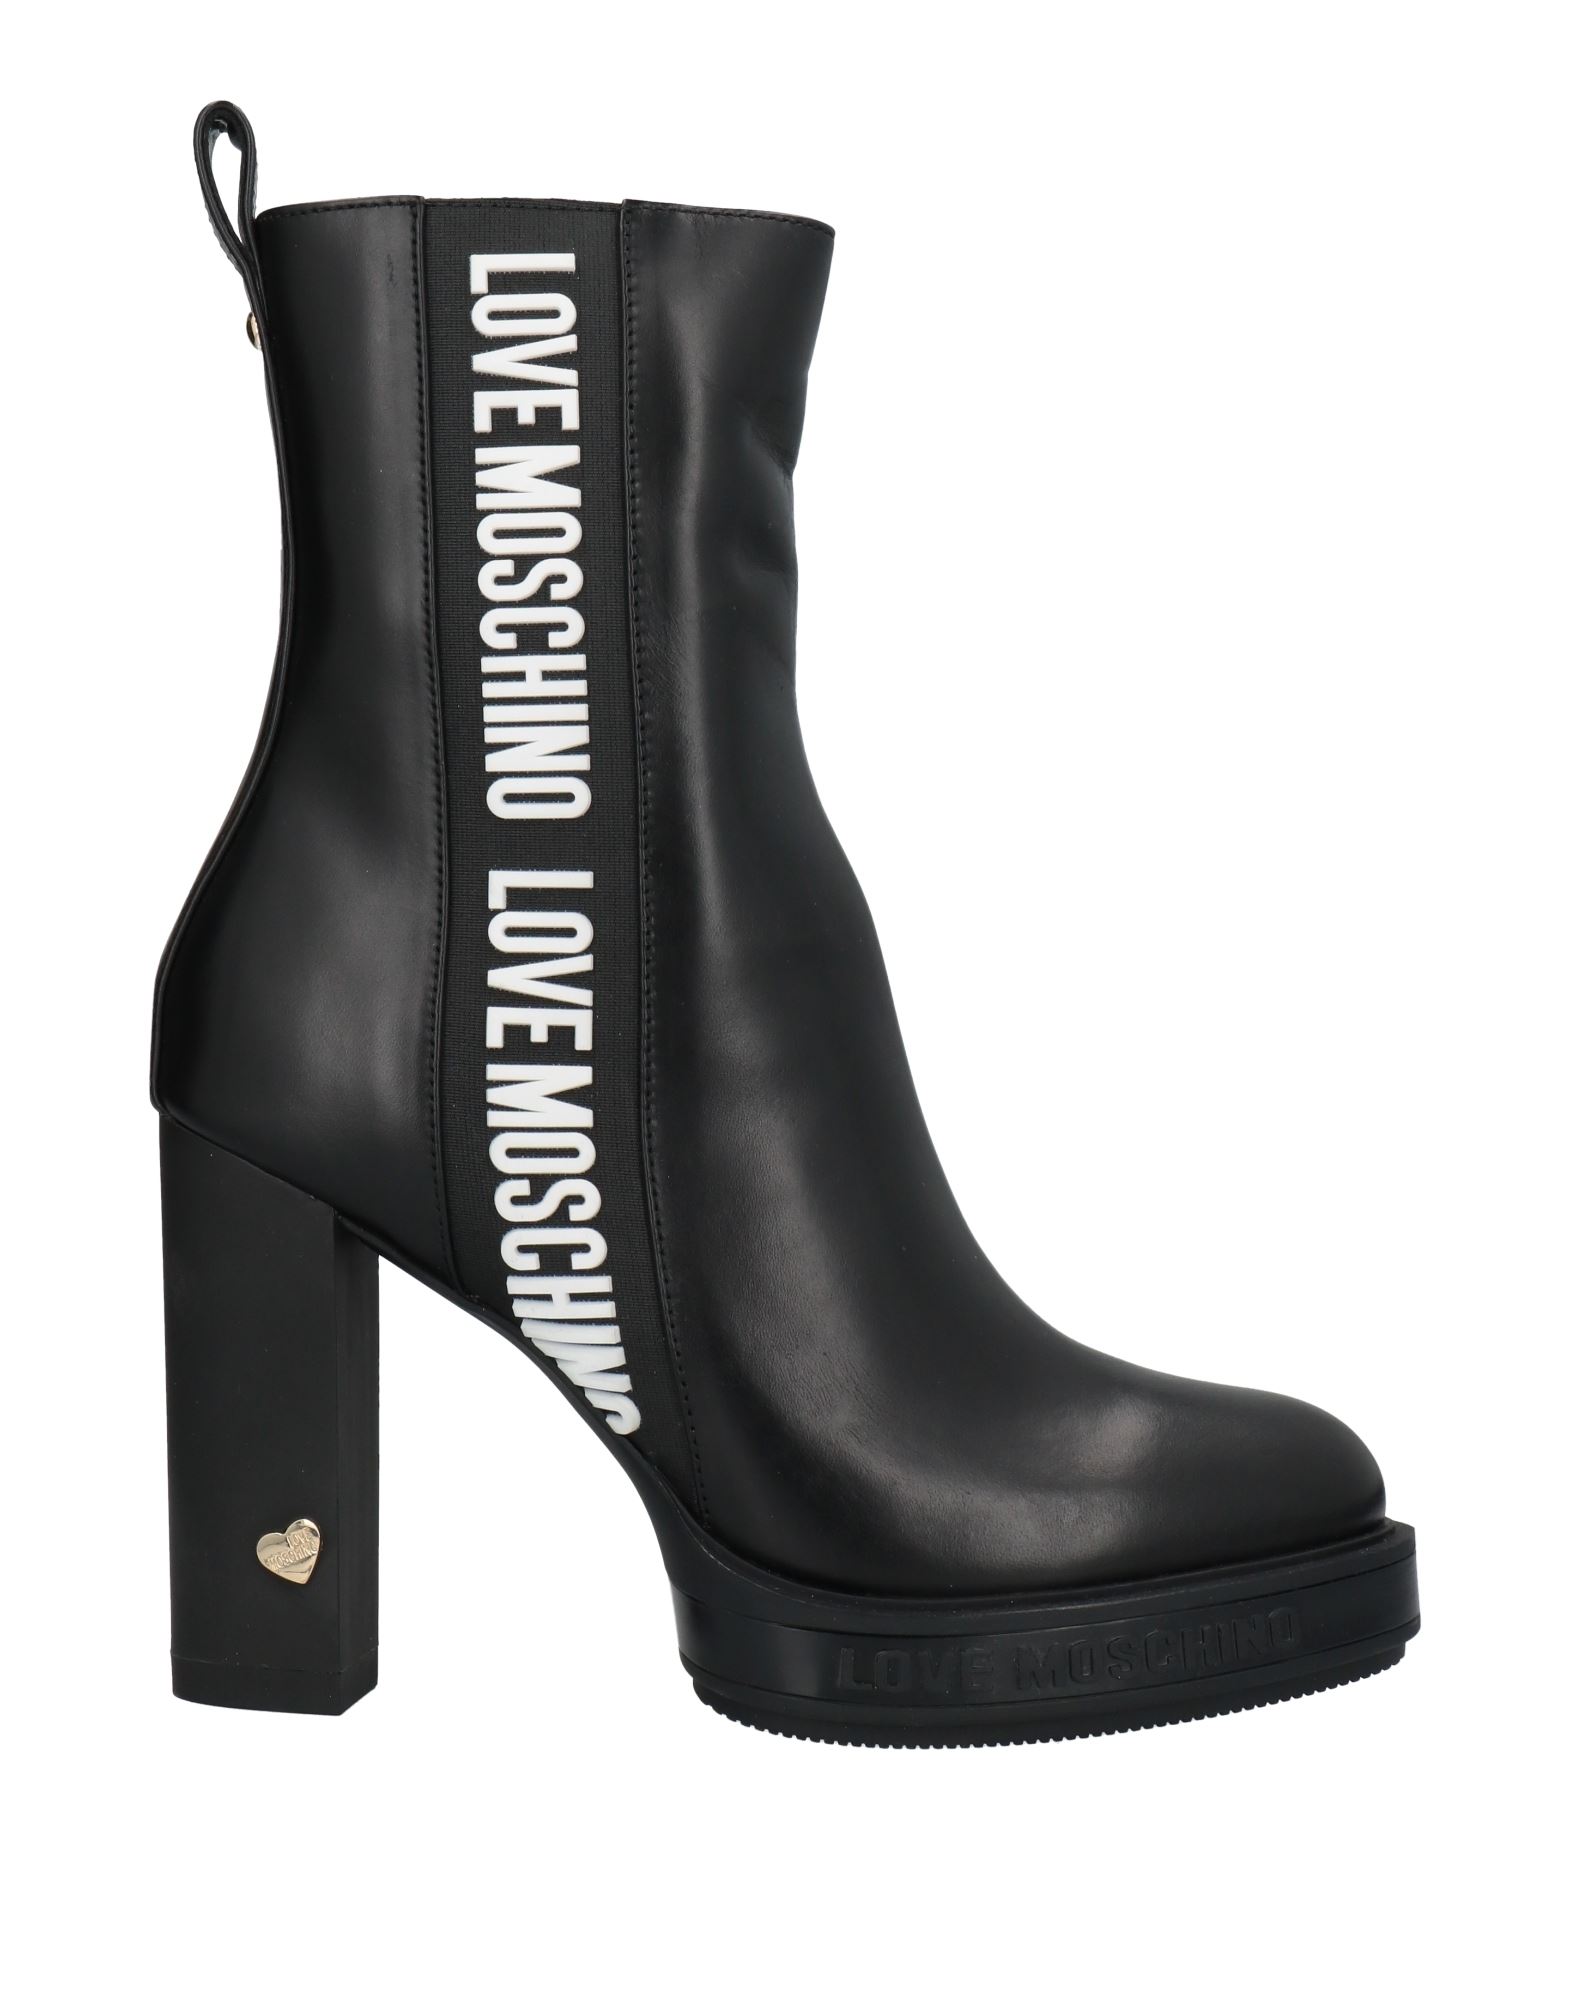 Majestueus Pijl Discipline Love Moschino Ankle Boots In Black | ModeSens